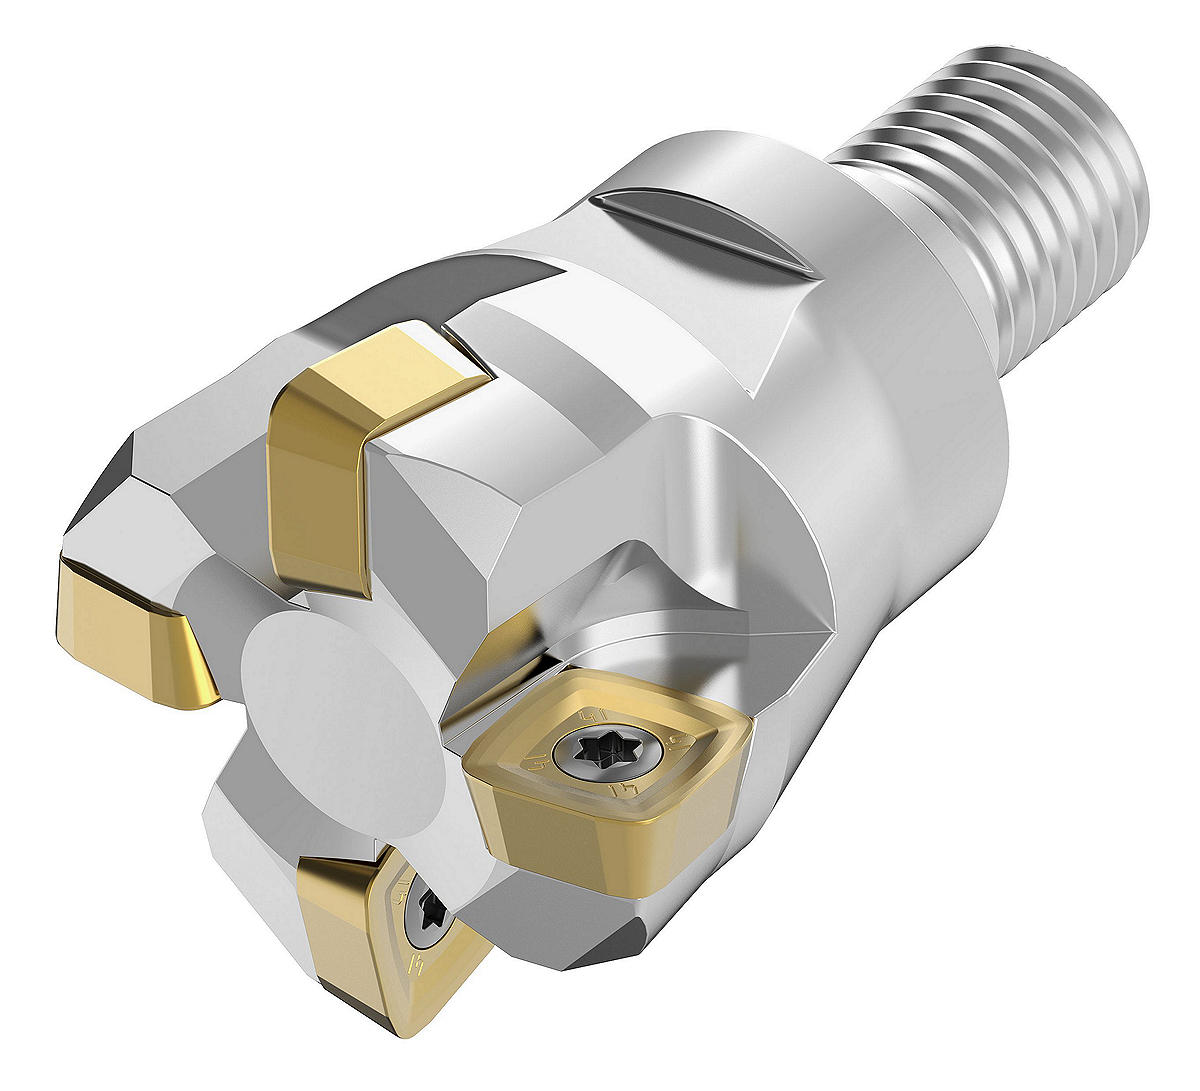 High-Feed copy milling cutter for multiple materials.